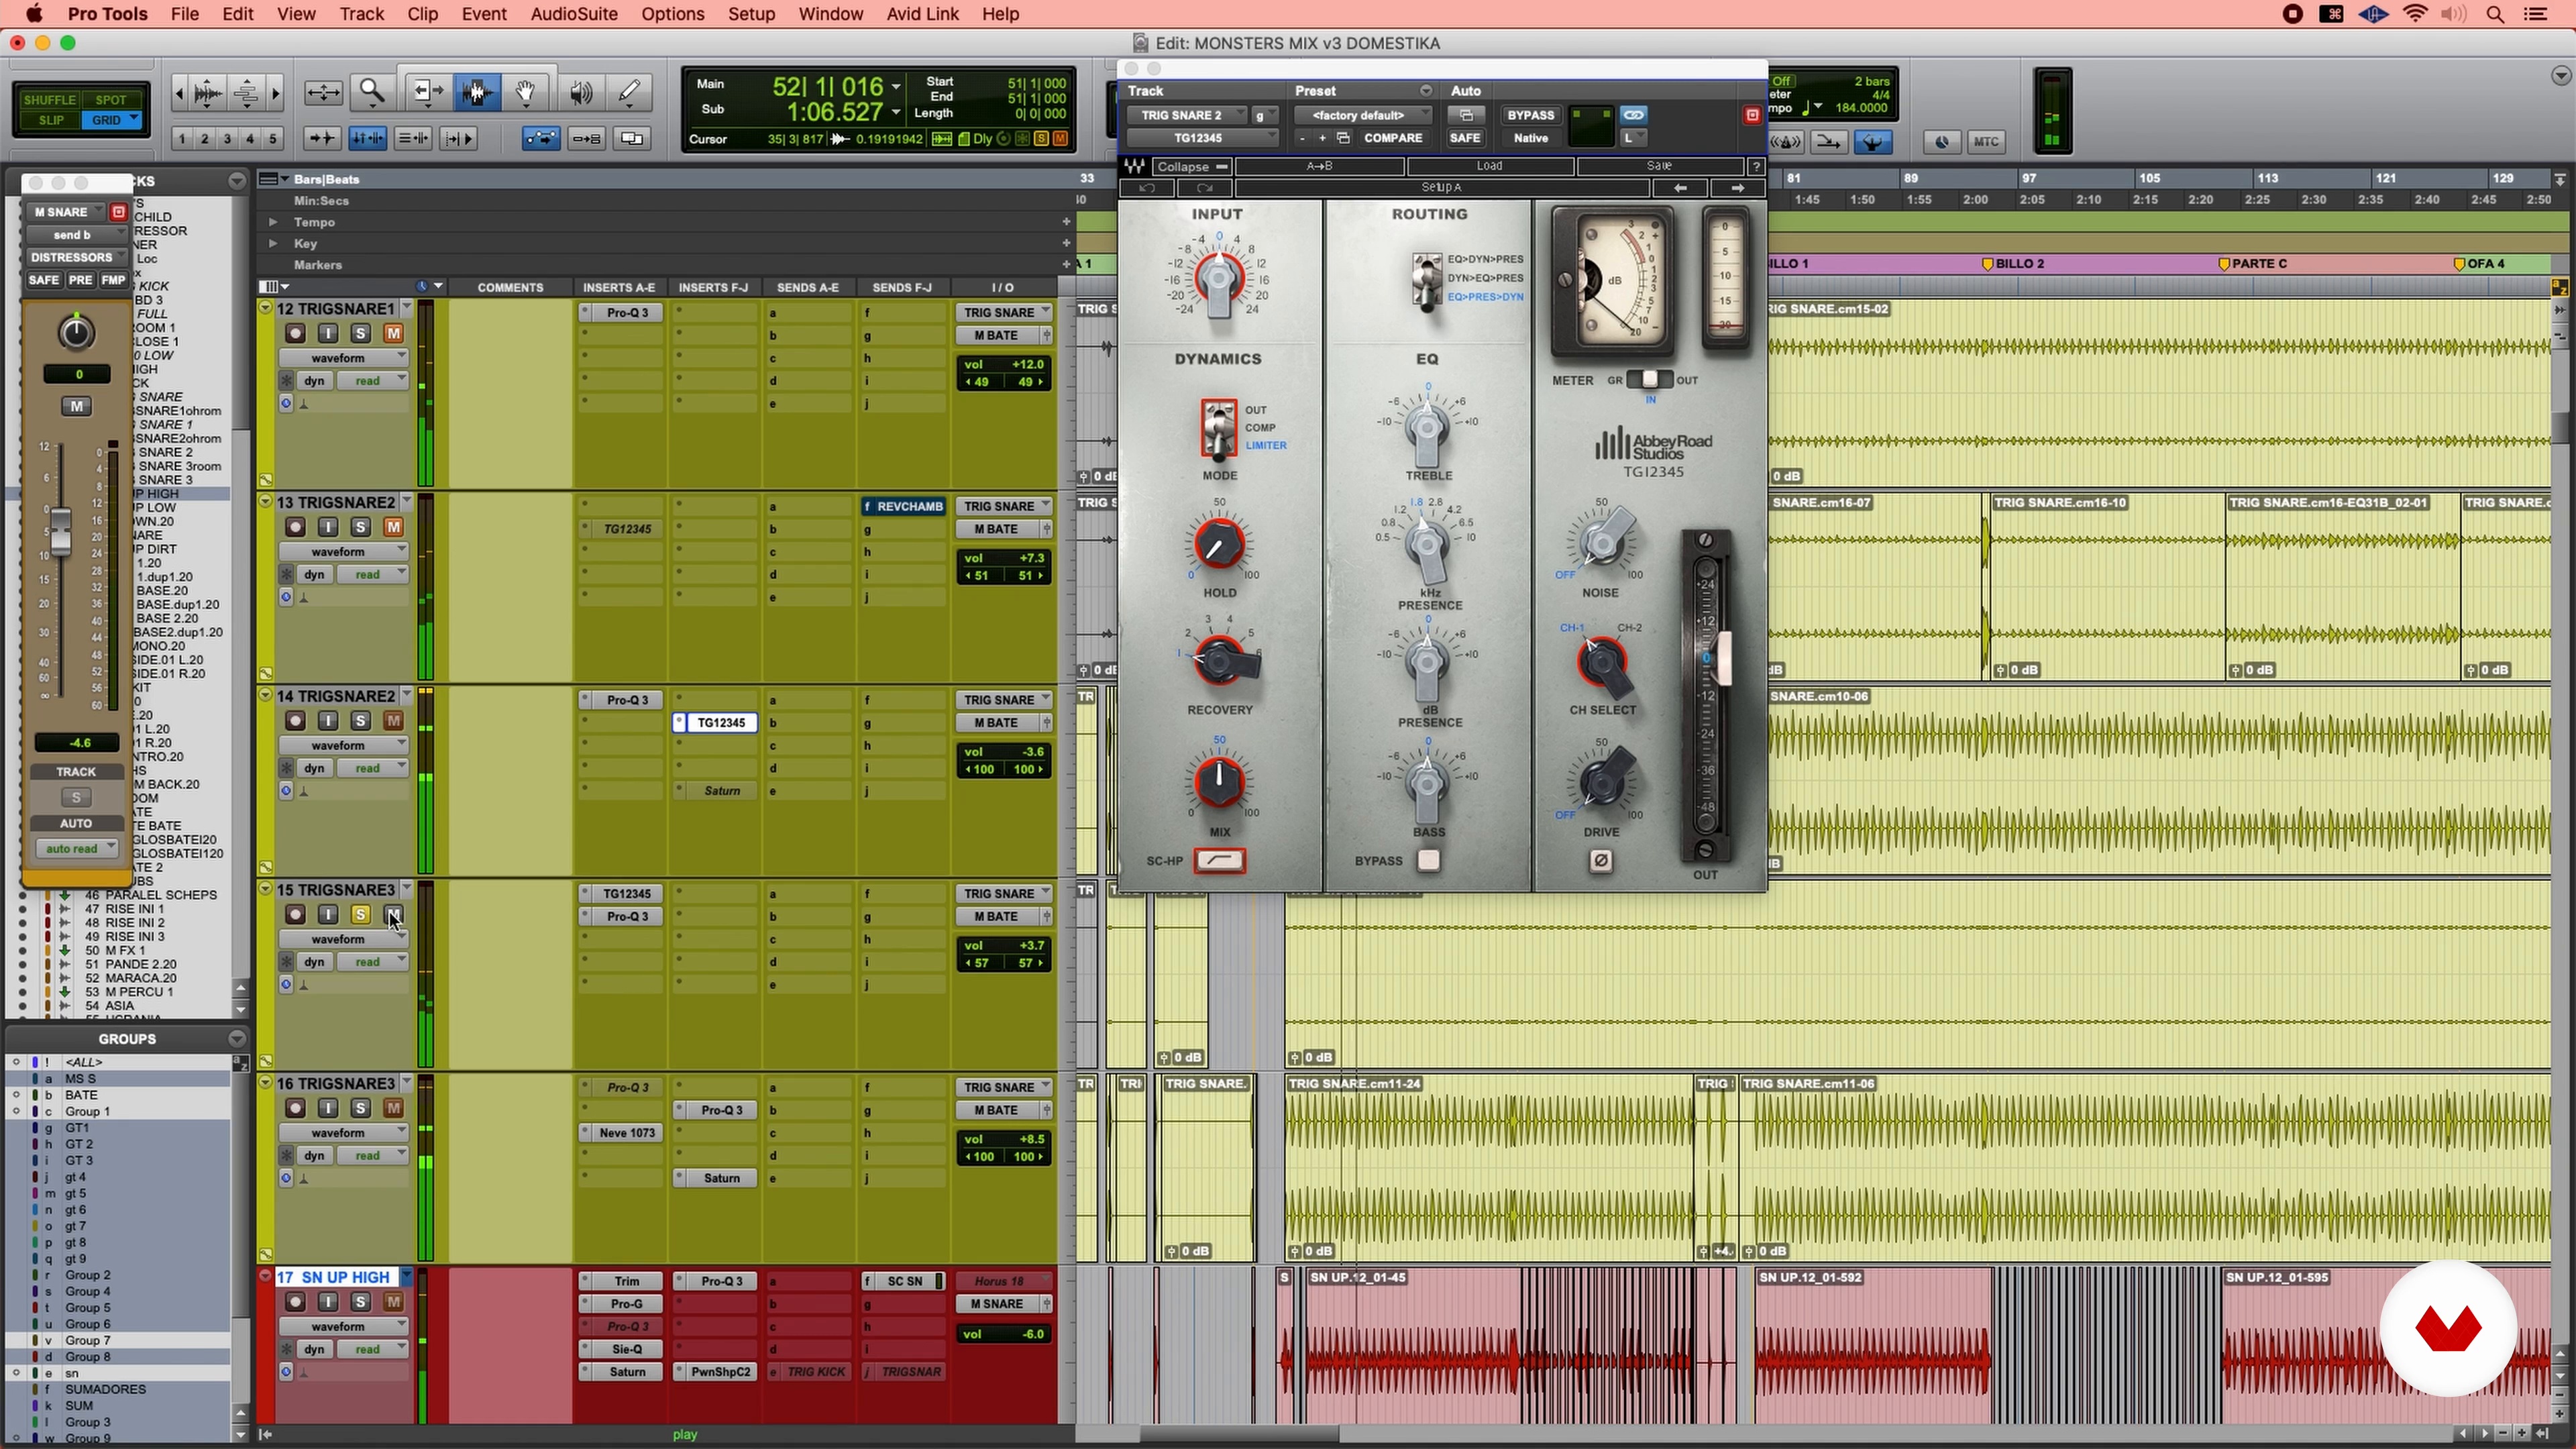 pro tools 9 update from 8